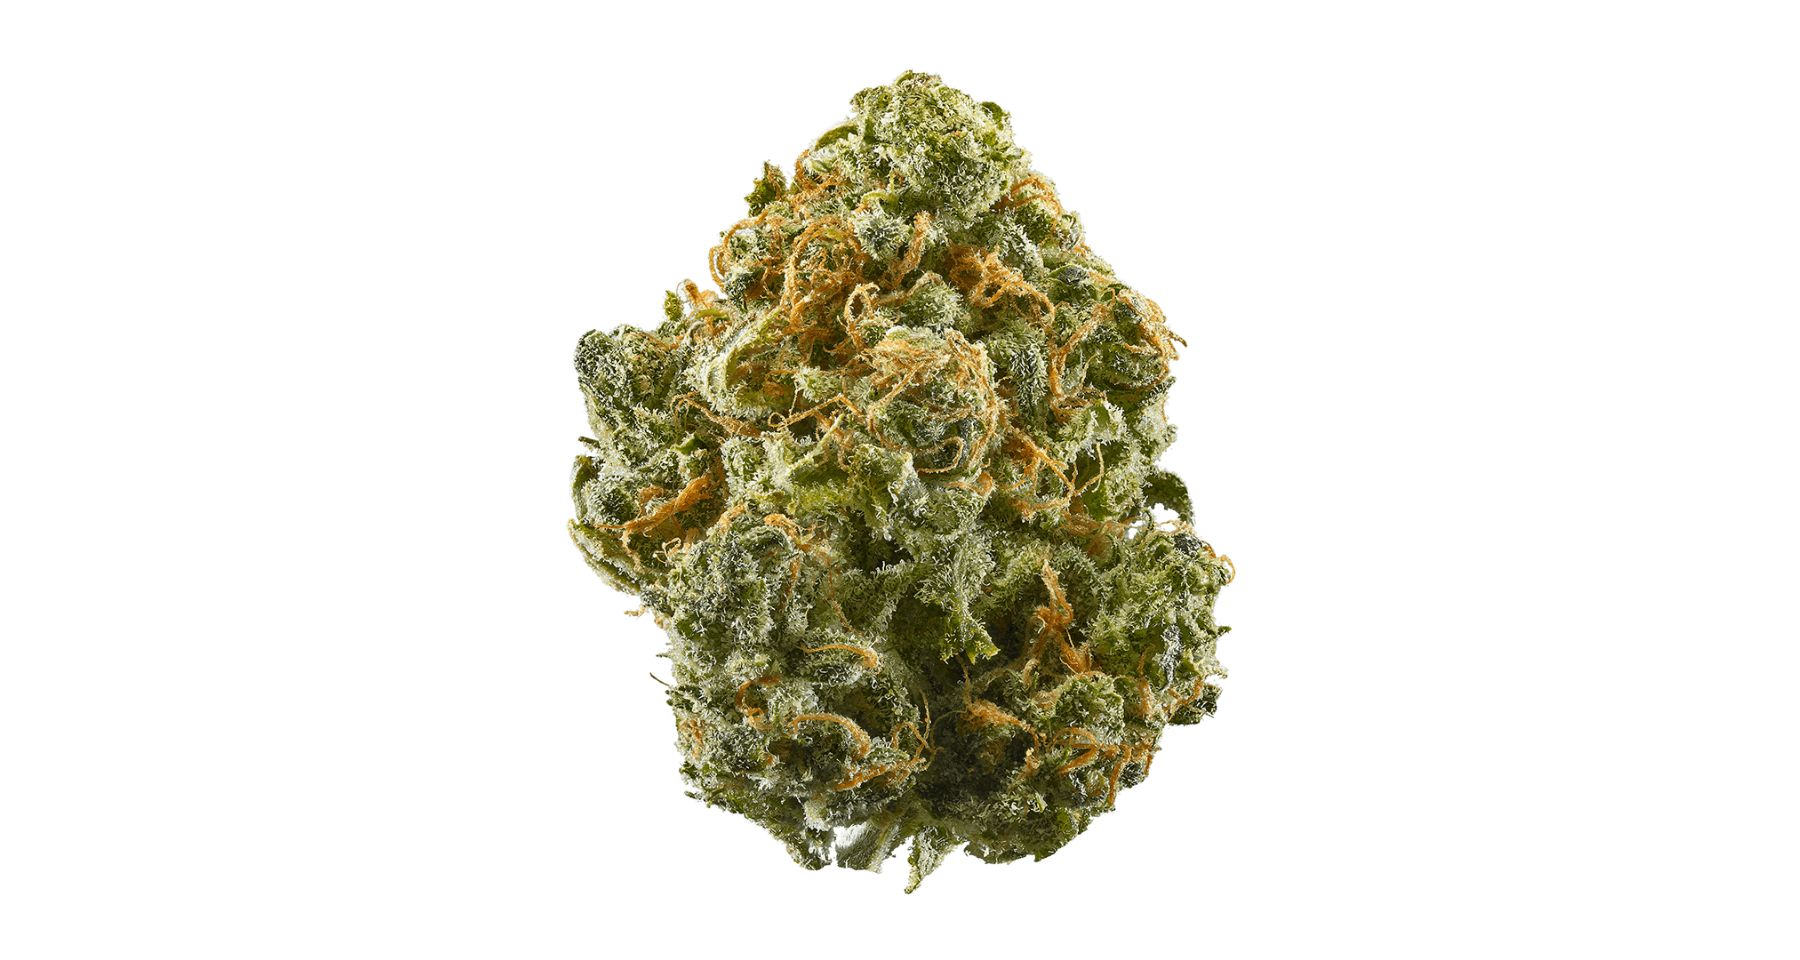 Blue Dream is a hybrid cannabis strain resulting from a genetic crossing between Blueberry and Haze.